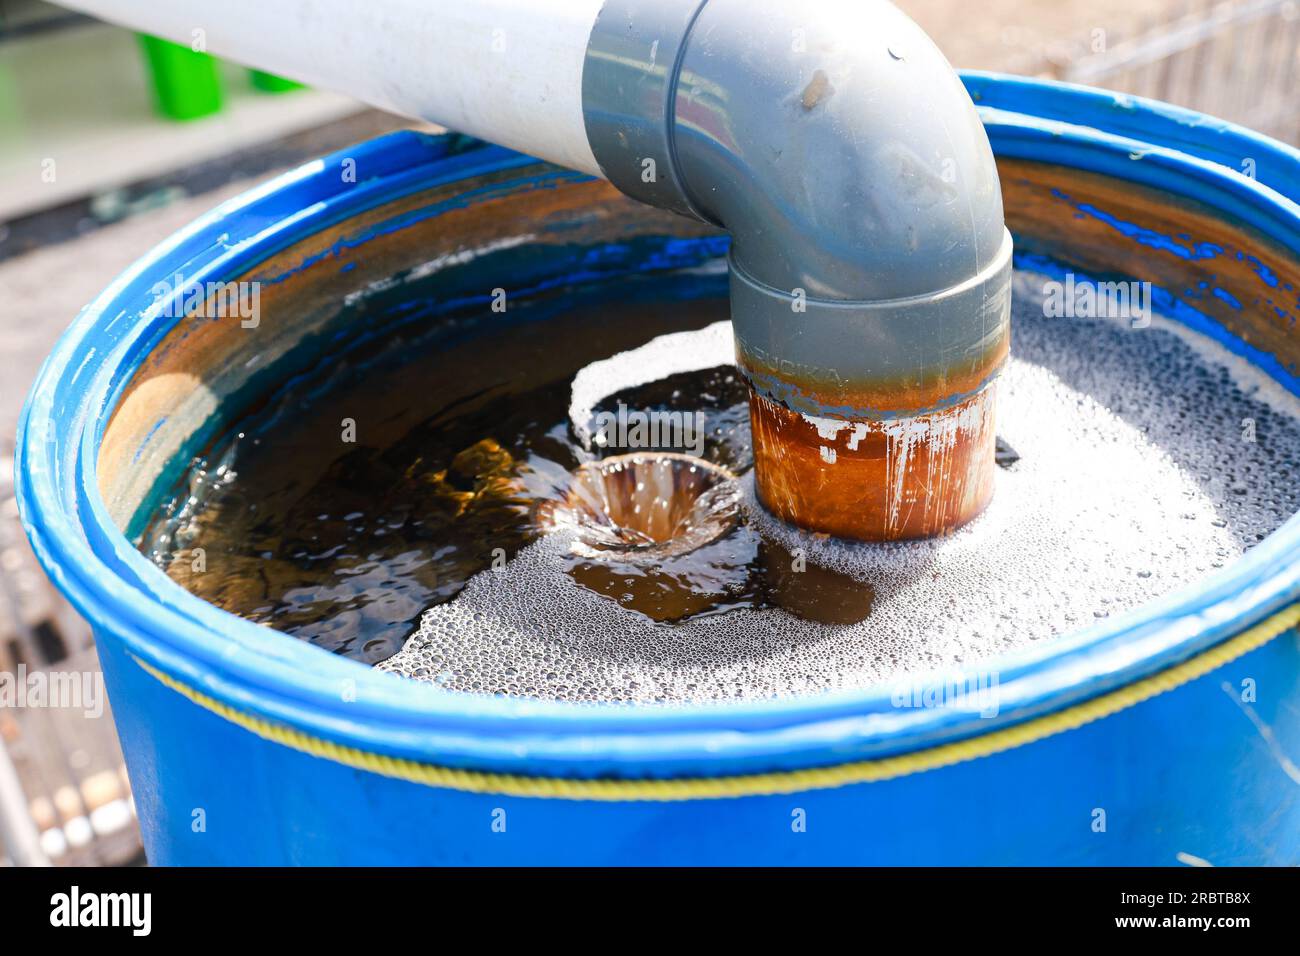 use of a water filtration system to filter out dirt and disease before entering water into fish and vanamei shrimp cultivation ponds Stock Photo